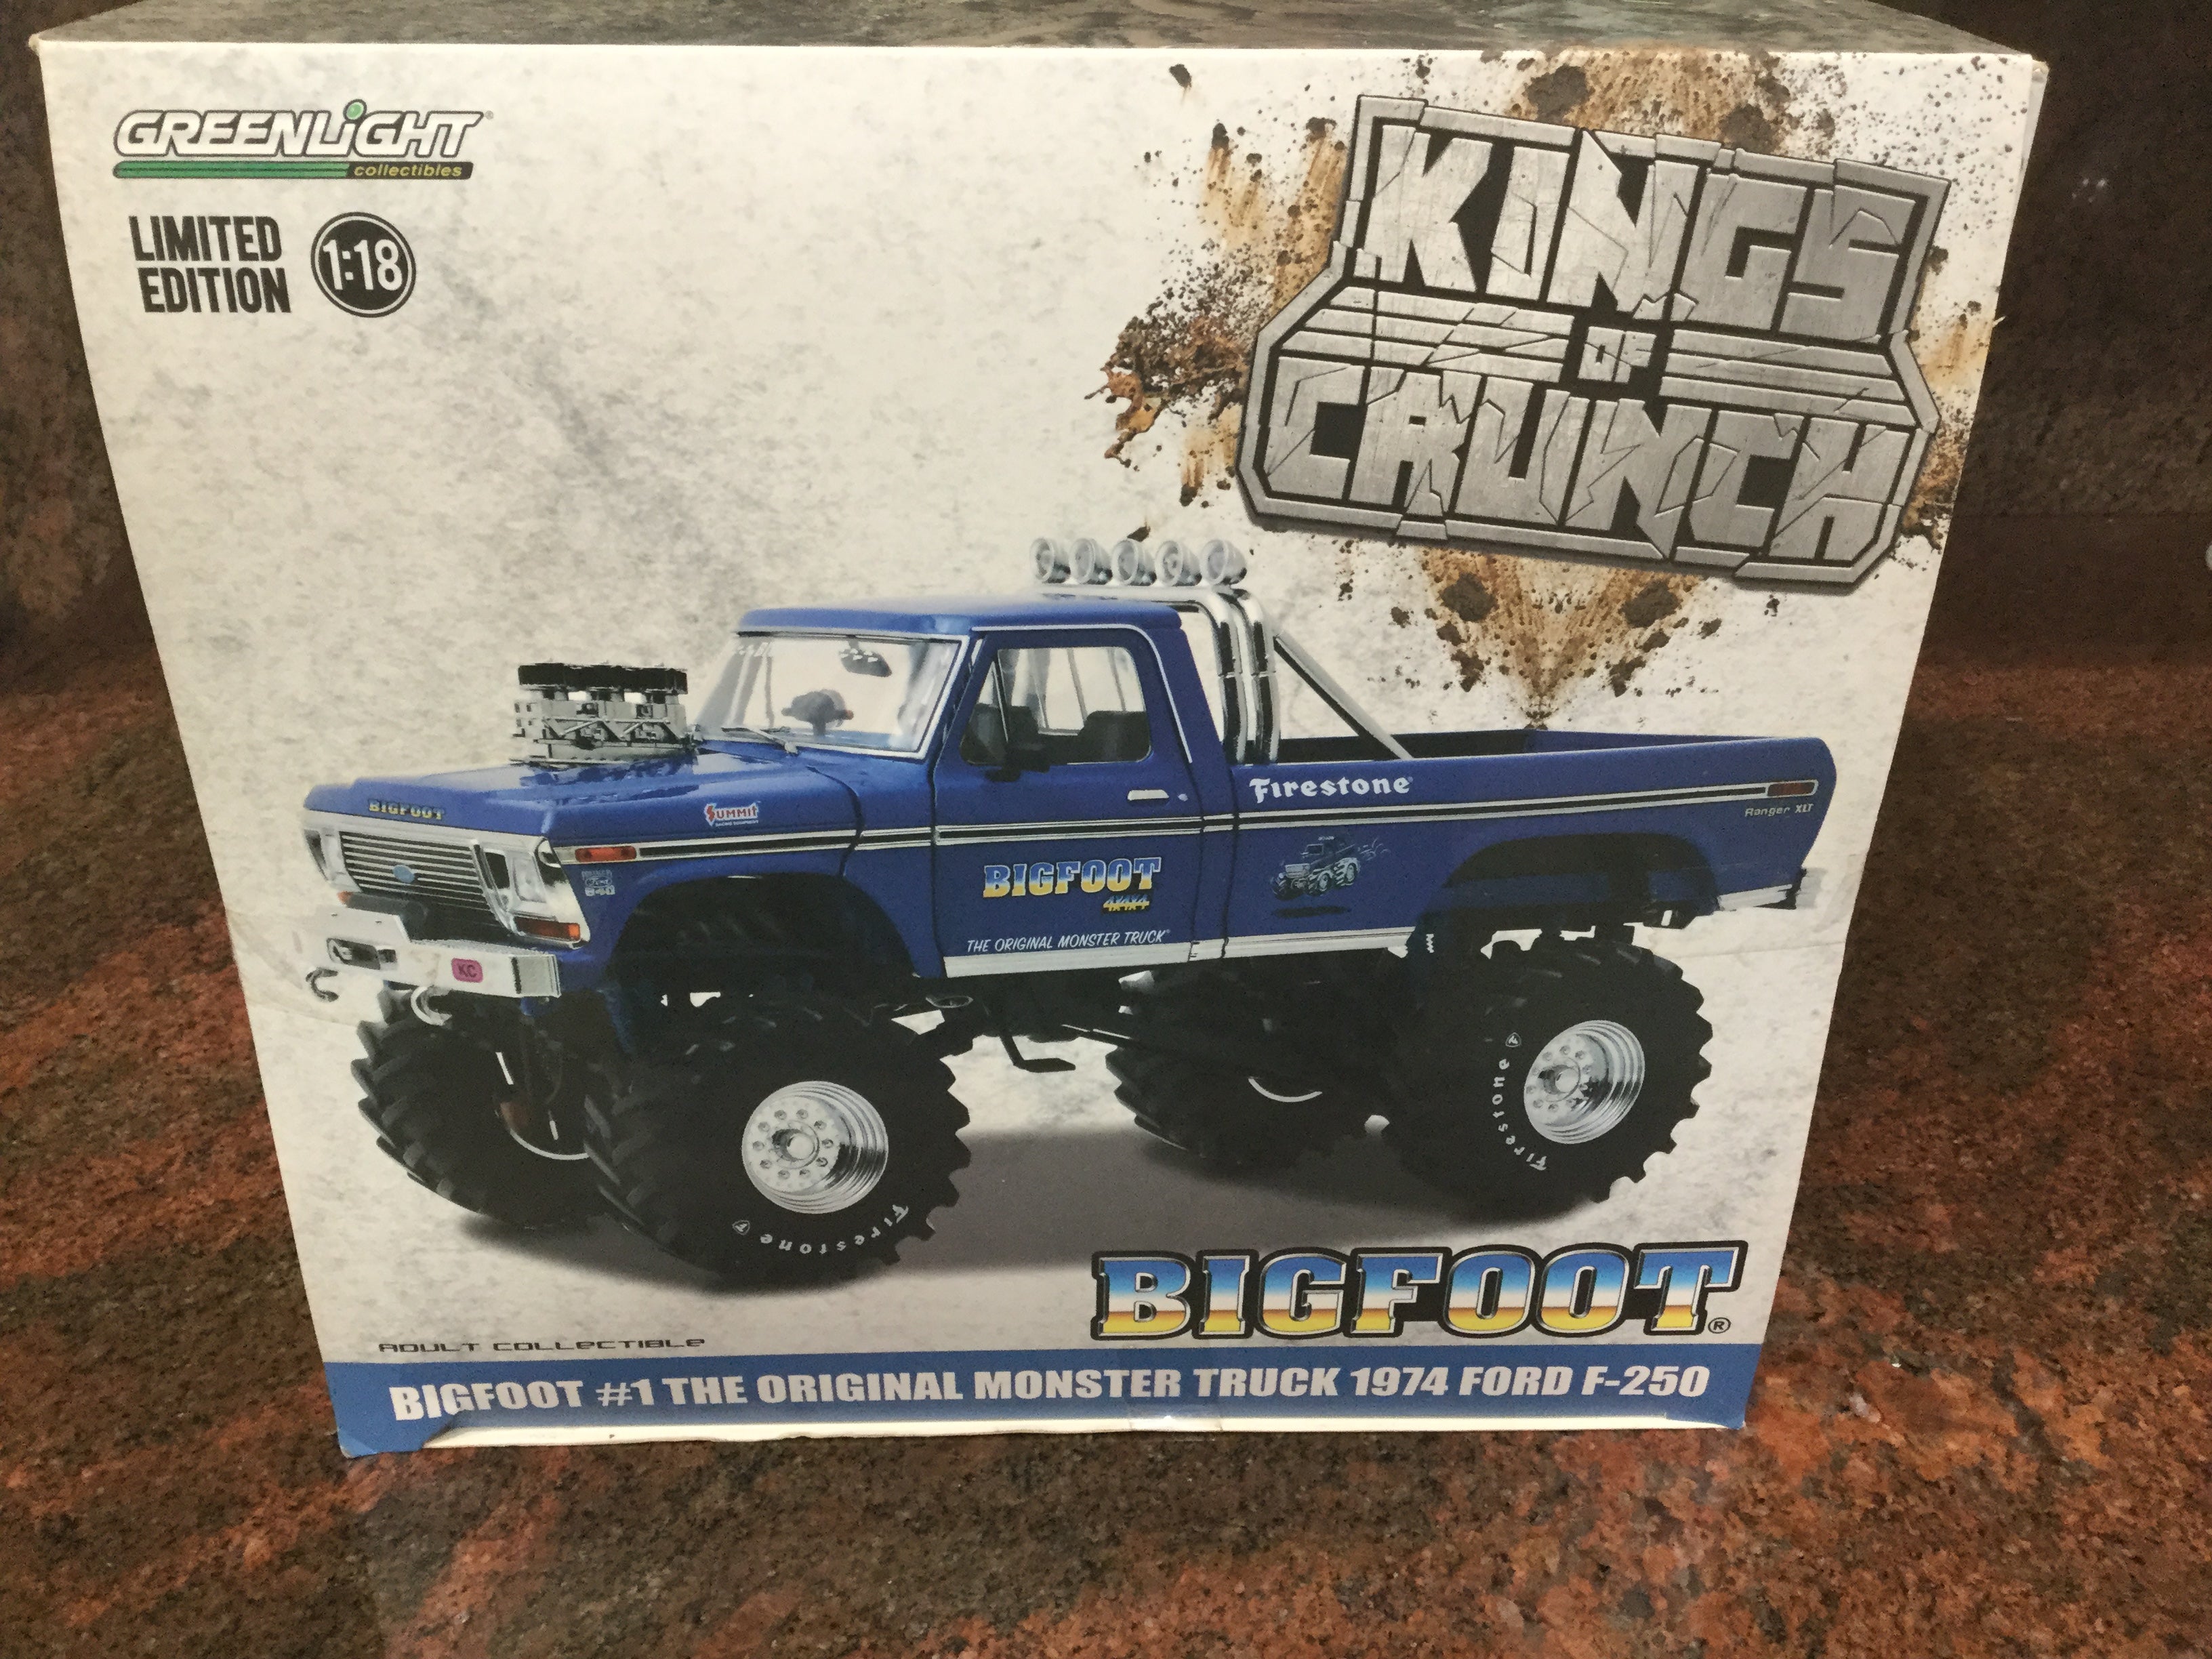 1/18 1974 Ford F-250 Bigfoot #1 The Original Monster Truck with 48 inch  Tires